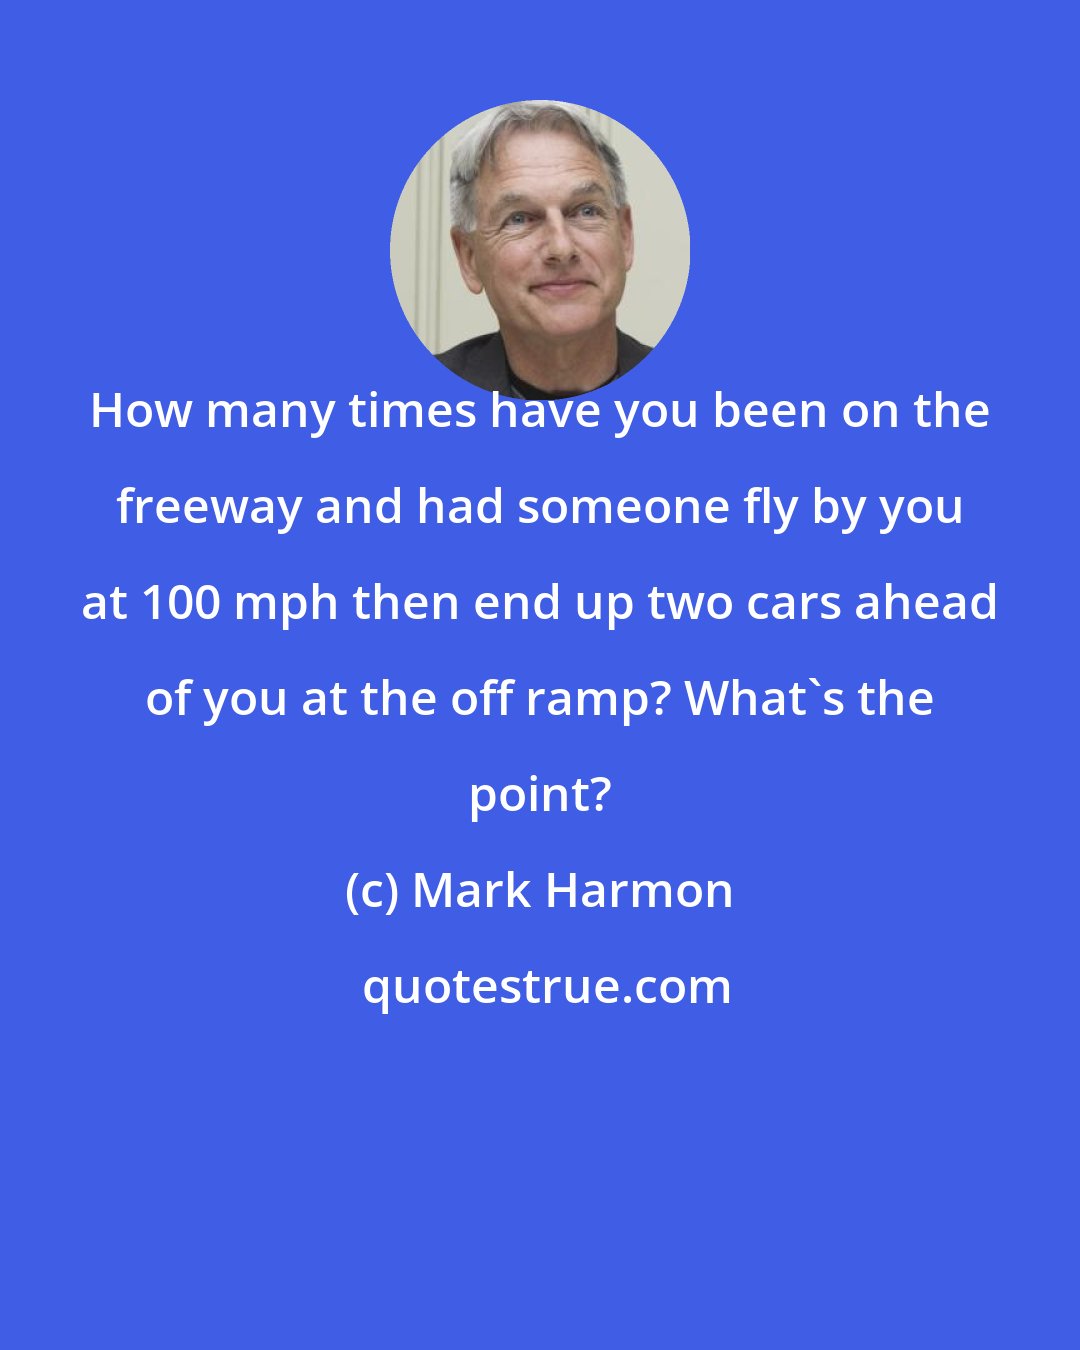 Mark Harmon: How many times have you been on the freeway and had someone fly by you at 100 mph then end up two cars ahead of you at the off ramp? What's the point?